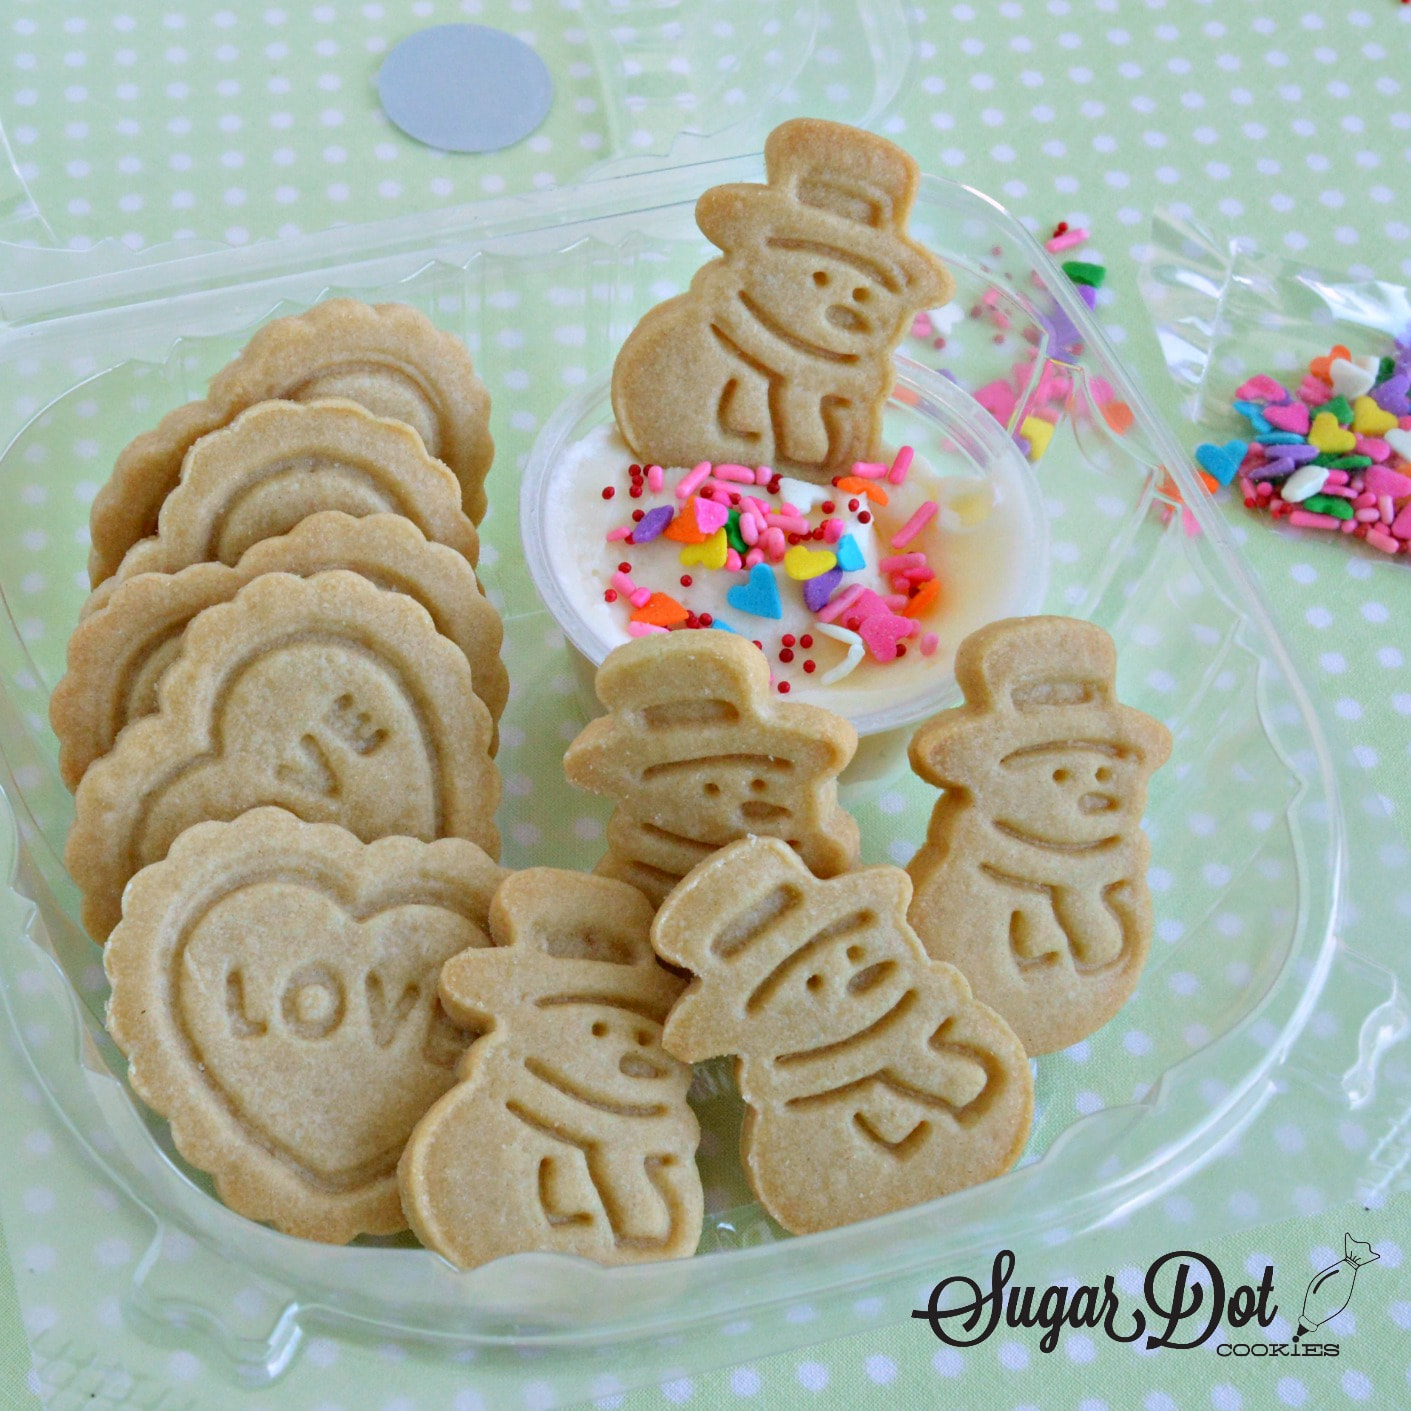 Mini plunger imprint cutters for cookies, pie crust and fondant. Make your  own homemade Dunkaroos! Bake cookies, provide icing and sprinkles!